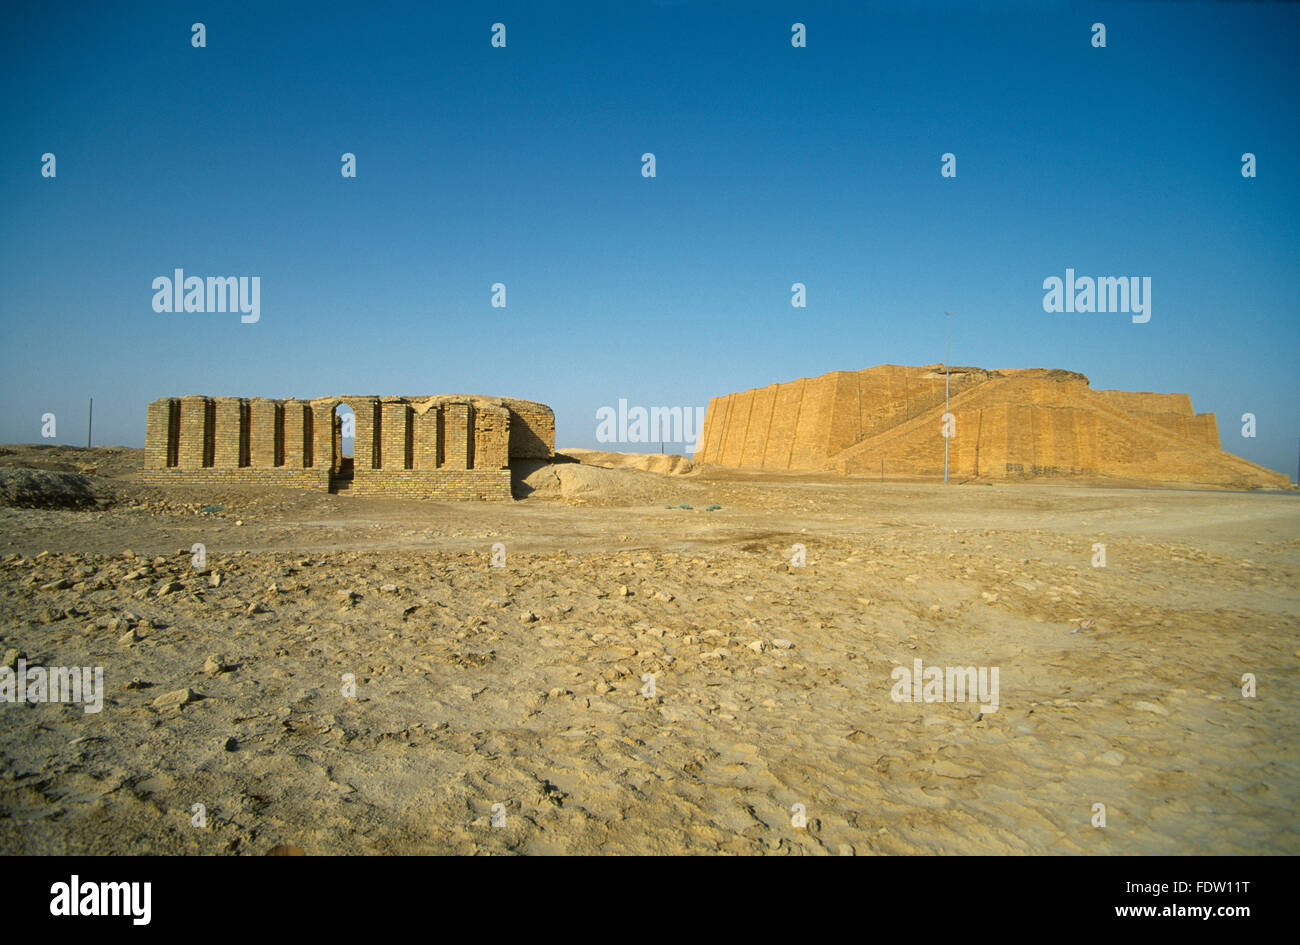 Ur Iraq Restored Ziggurat & Amar Sin Temple Home Of Abraham Inhabited Since Neolithic Time. Thought To Be First Arch In World To Be Discovered Stock Photo